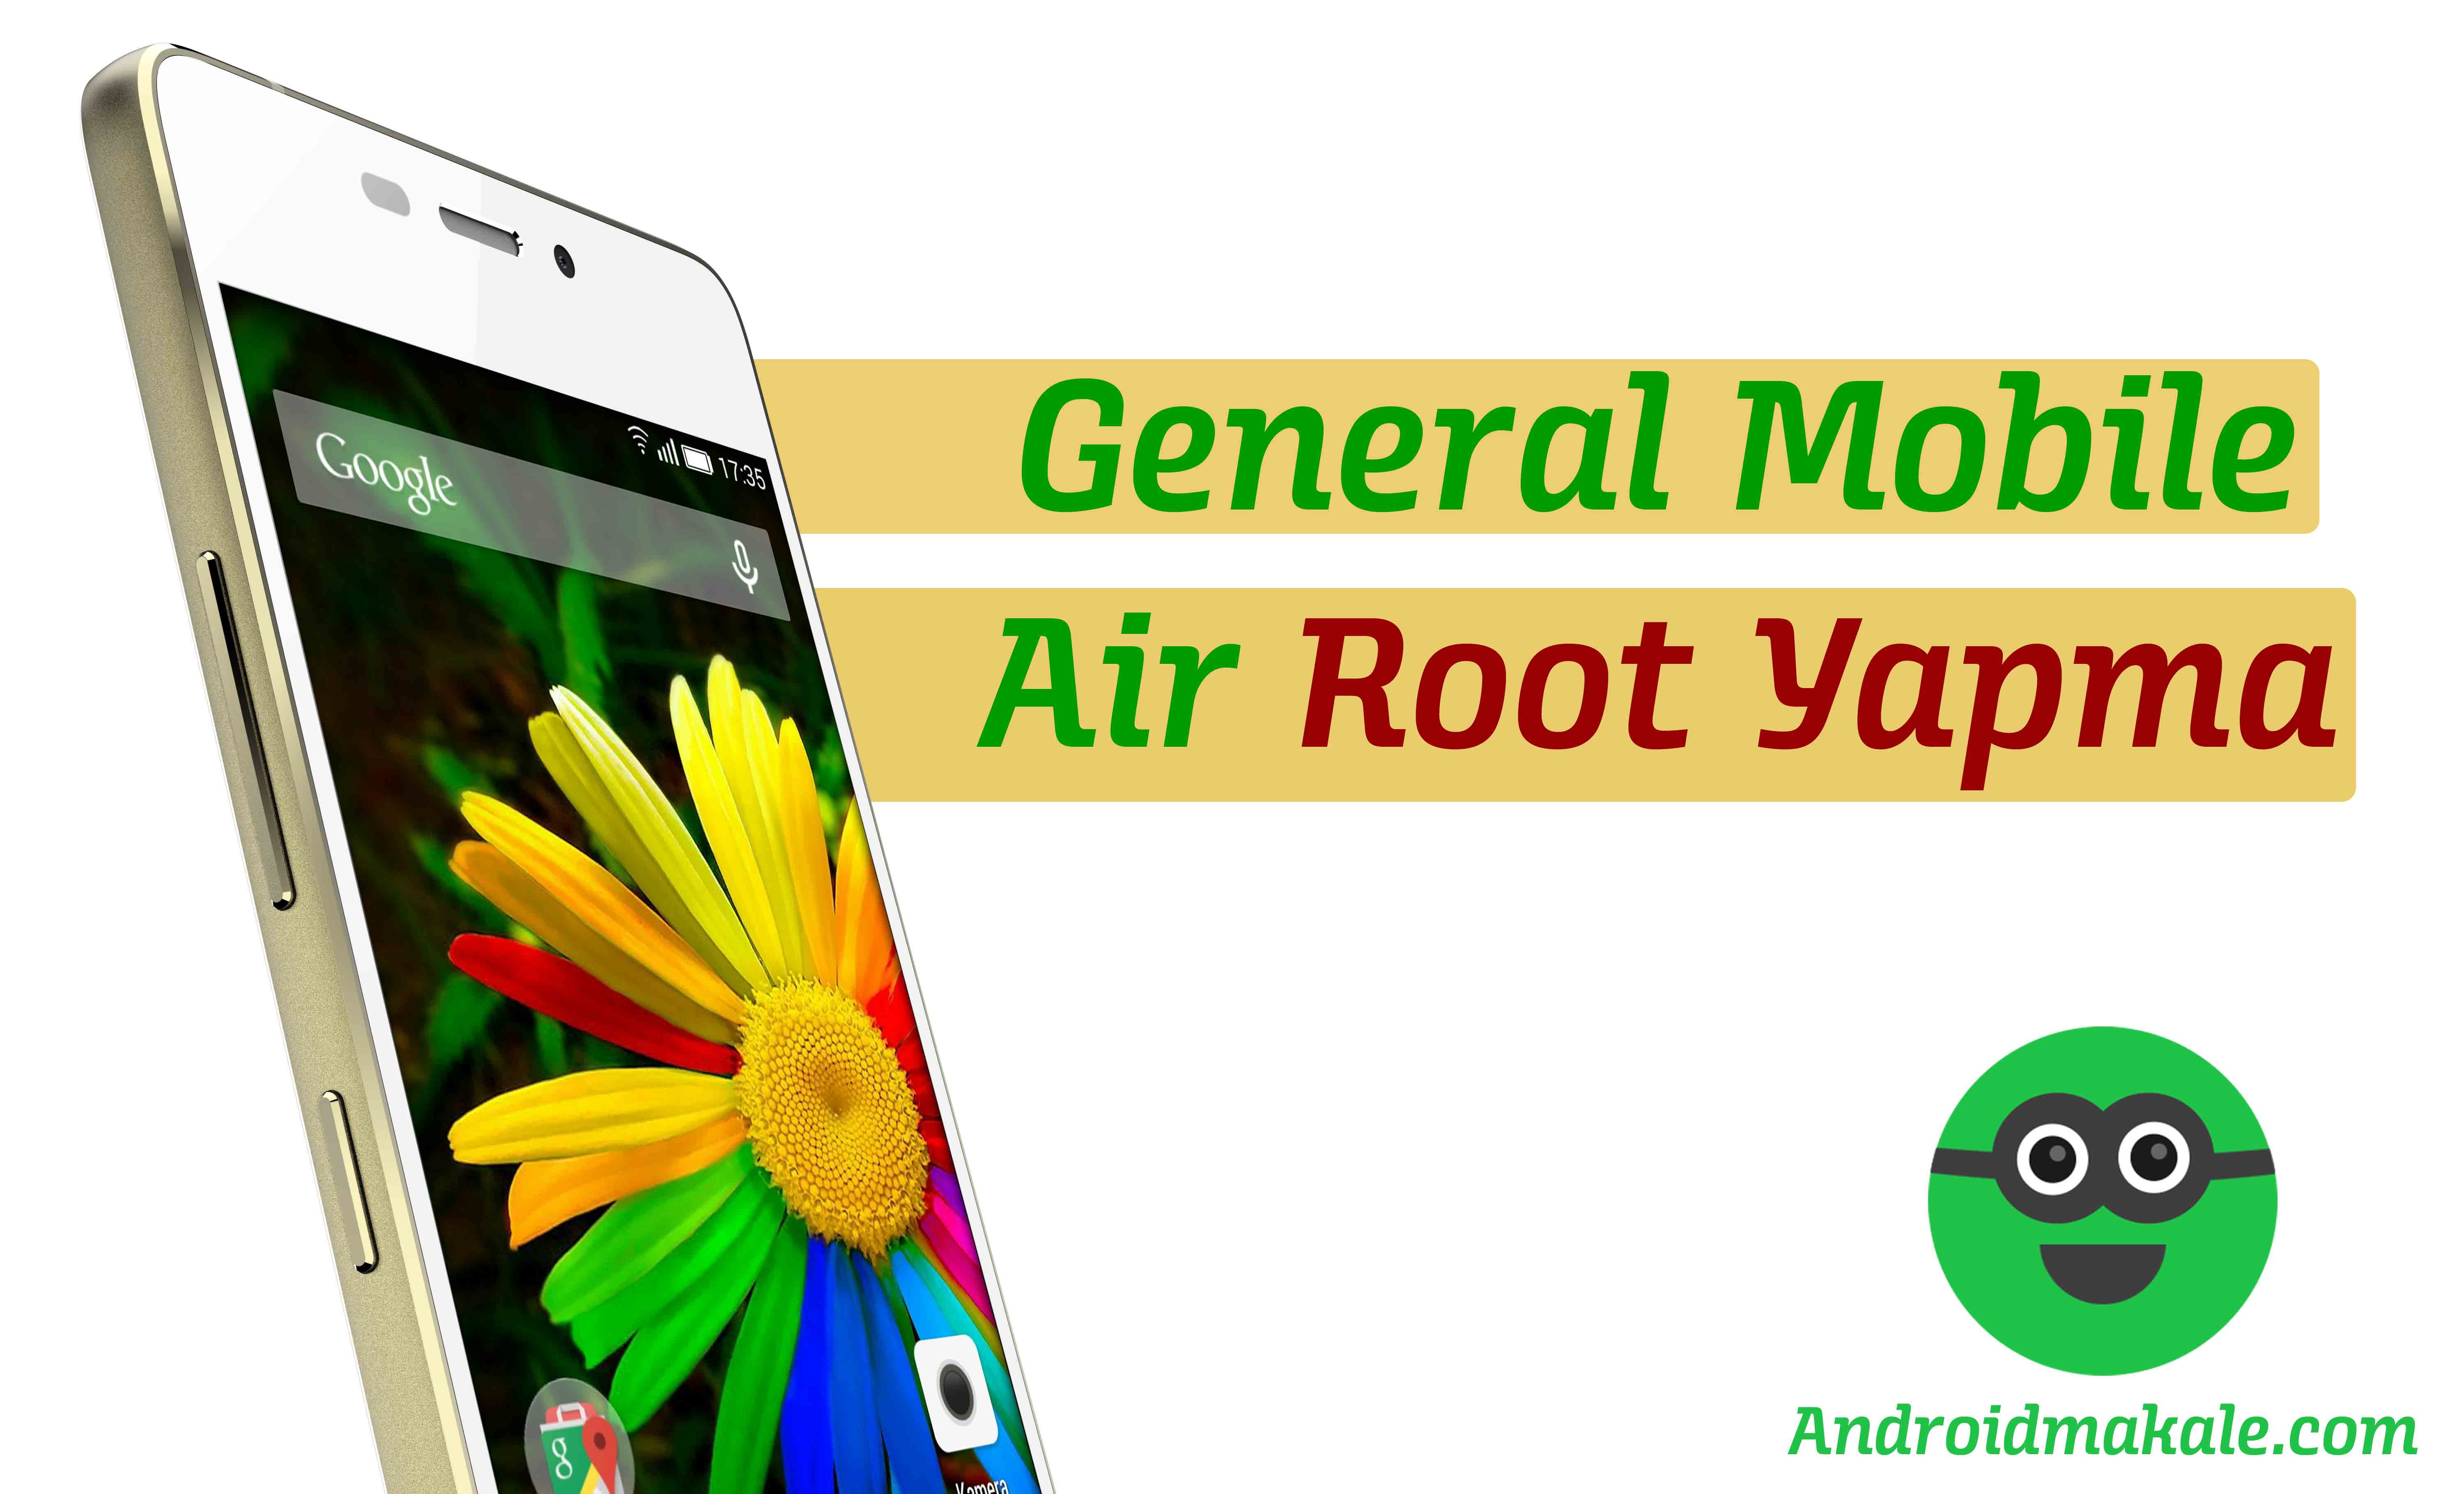 General Mobile Discovery Air Root Yapma Rehberi gm discovery air root yapma gm air root yapma gm air root rehberi general mobile root yapma android makale 